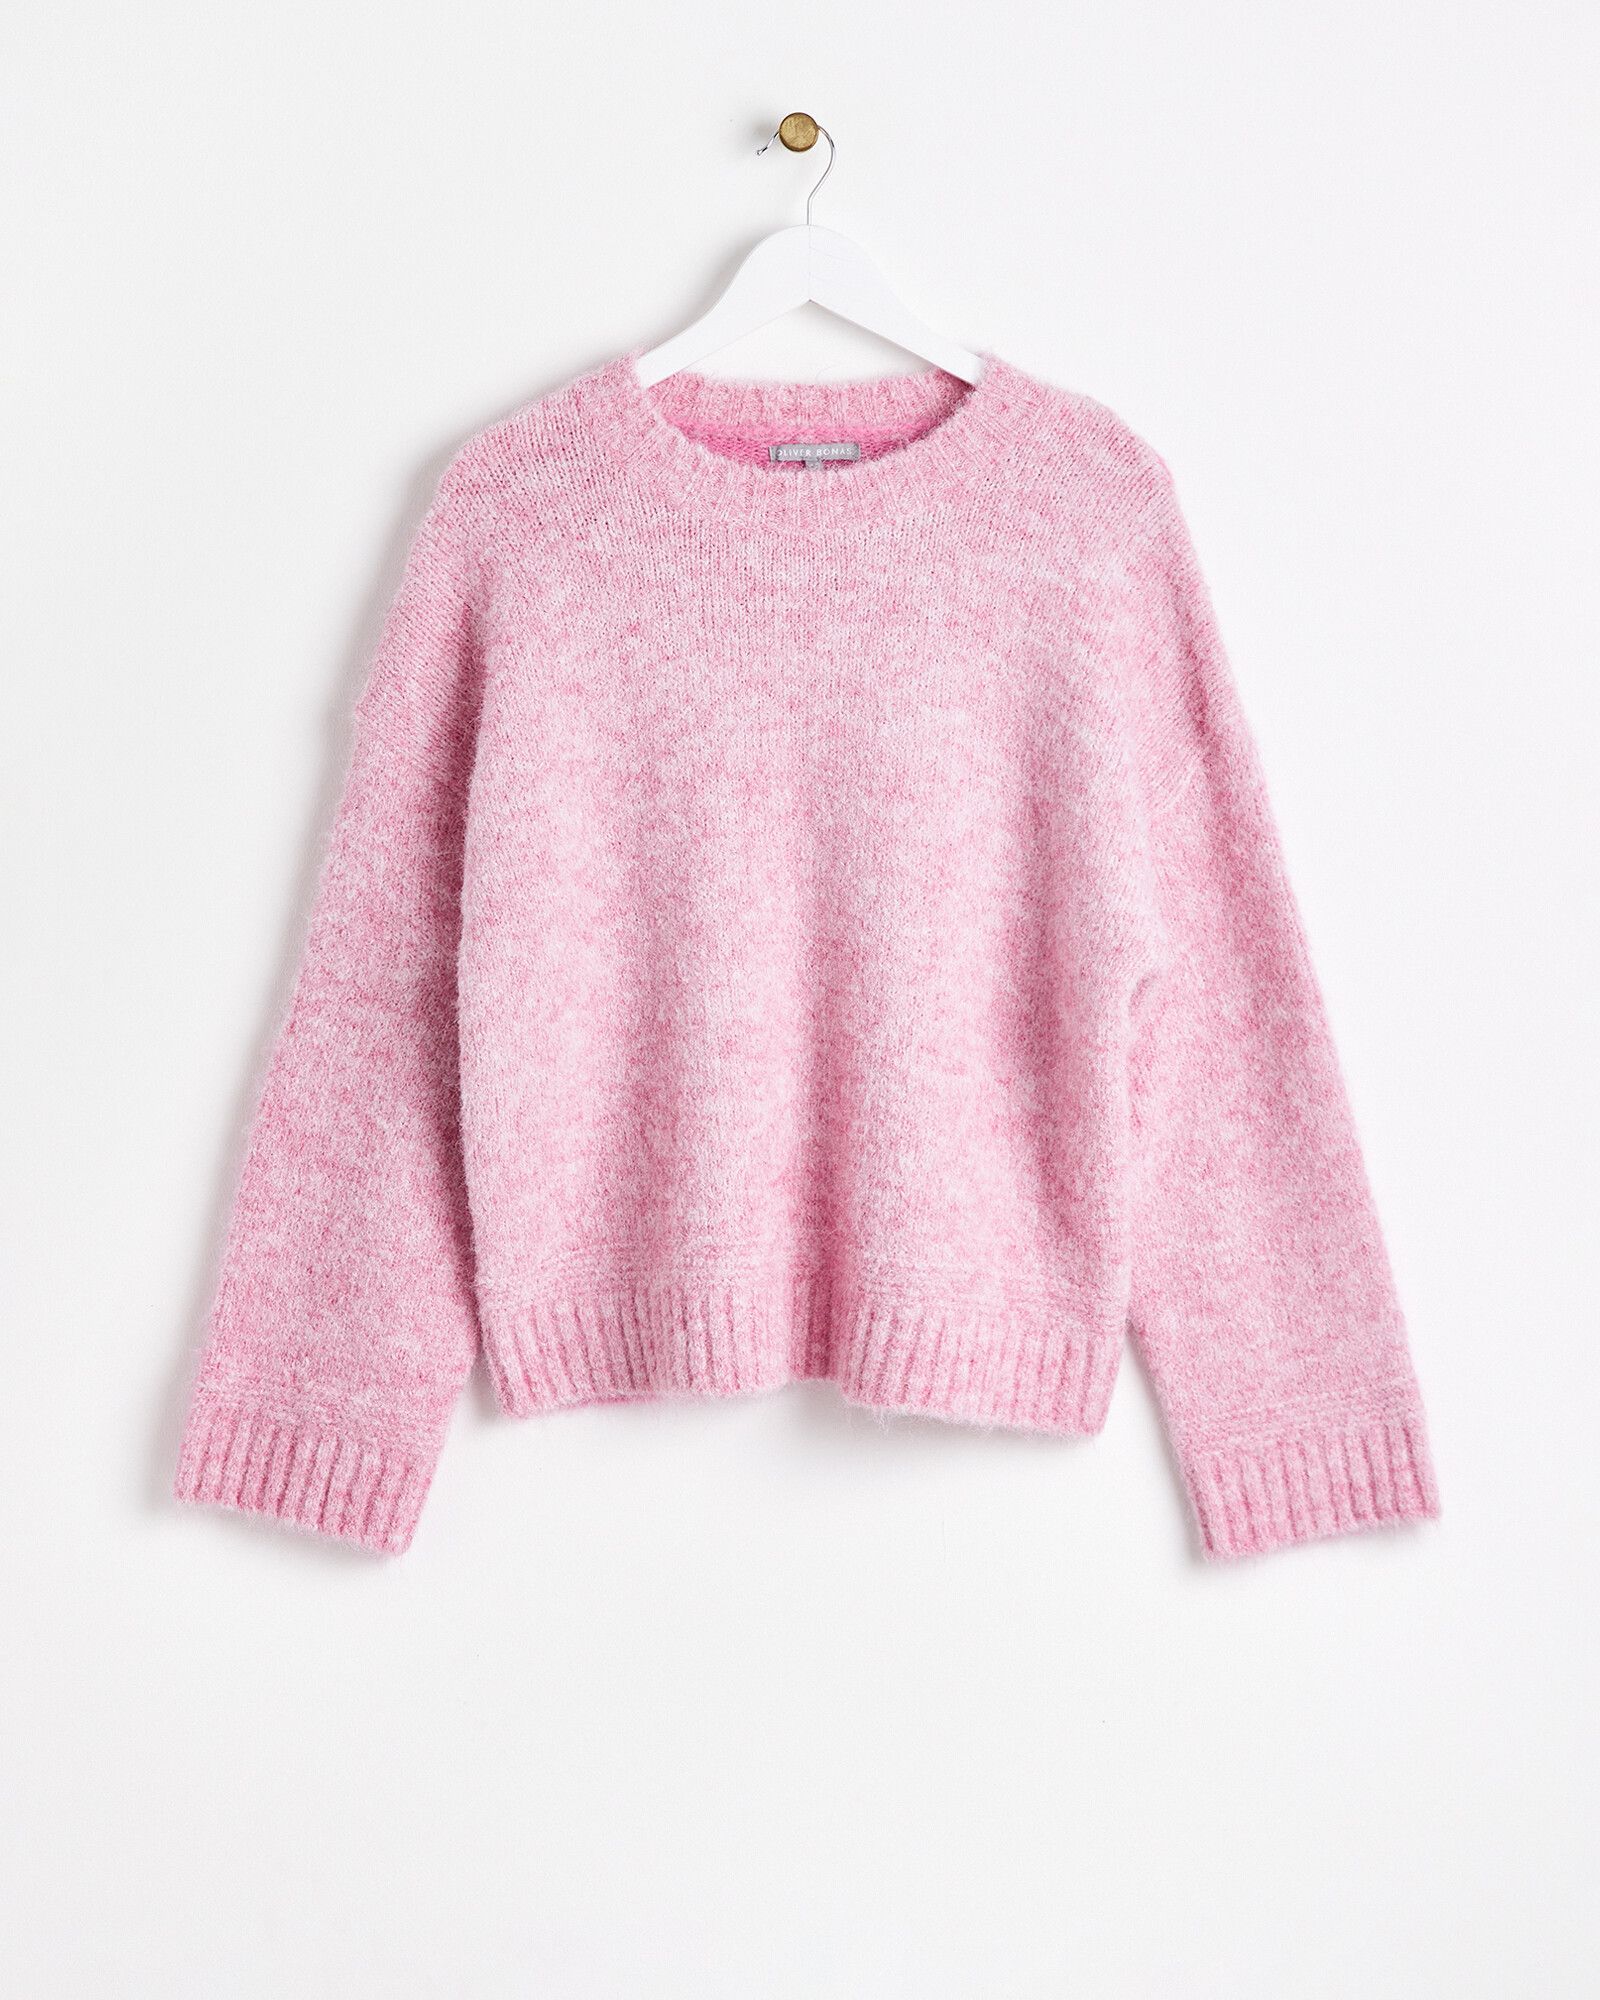 Two Tone Pink Knitted Jumper | Oliver Bonas